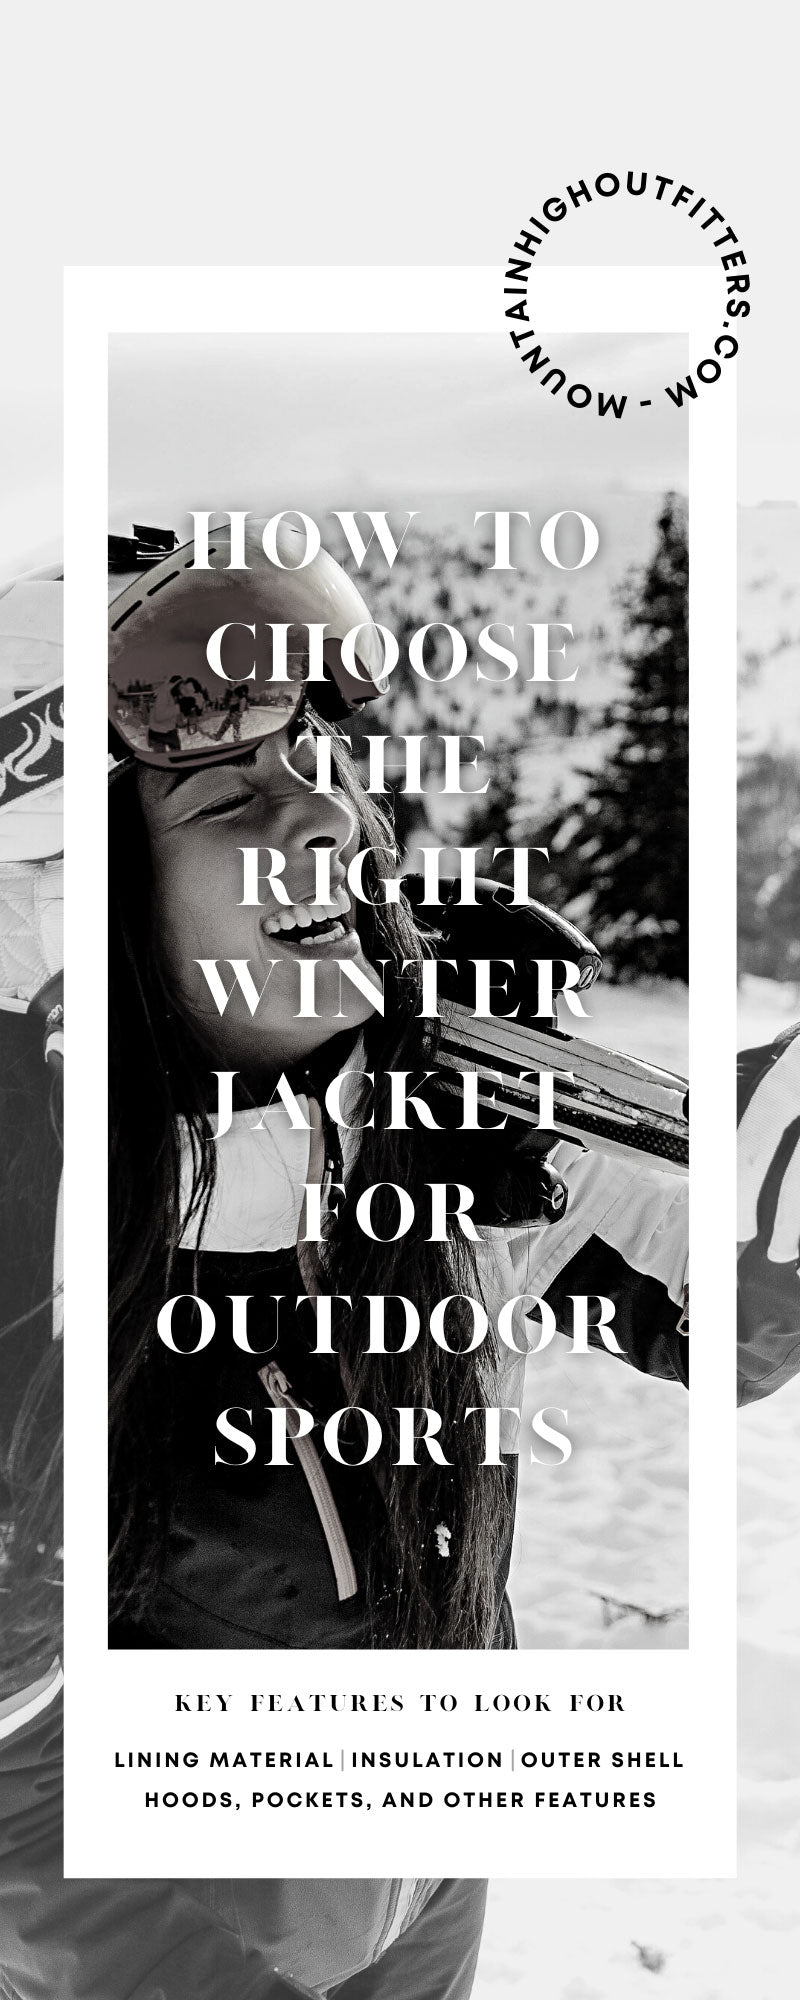 How To Choose the Right Winter Jacket for Outdoor Sports